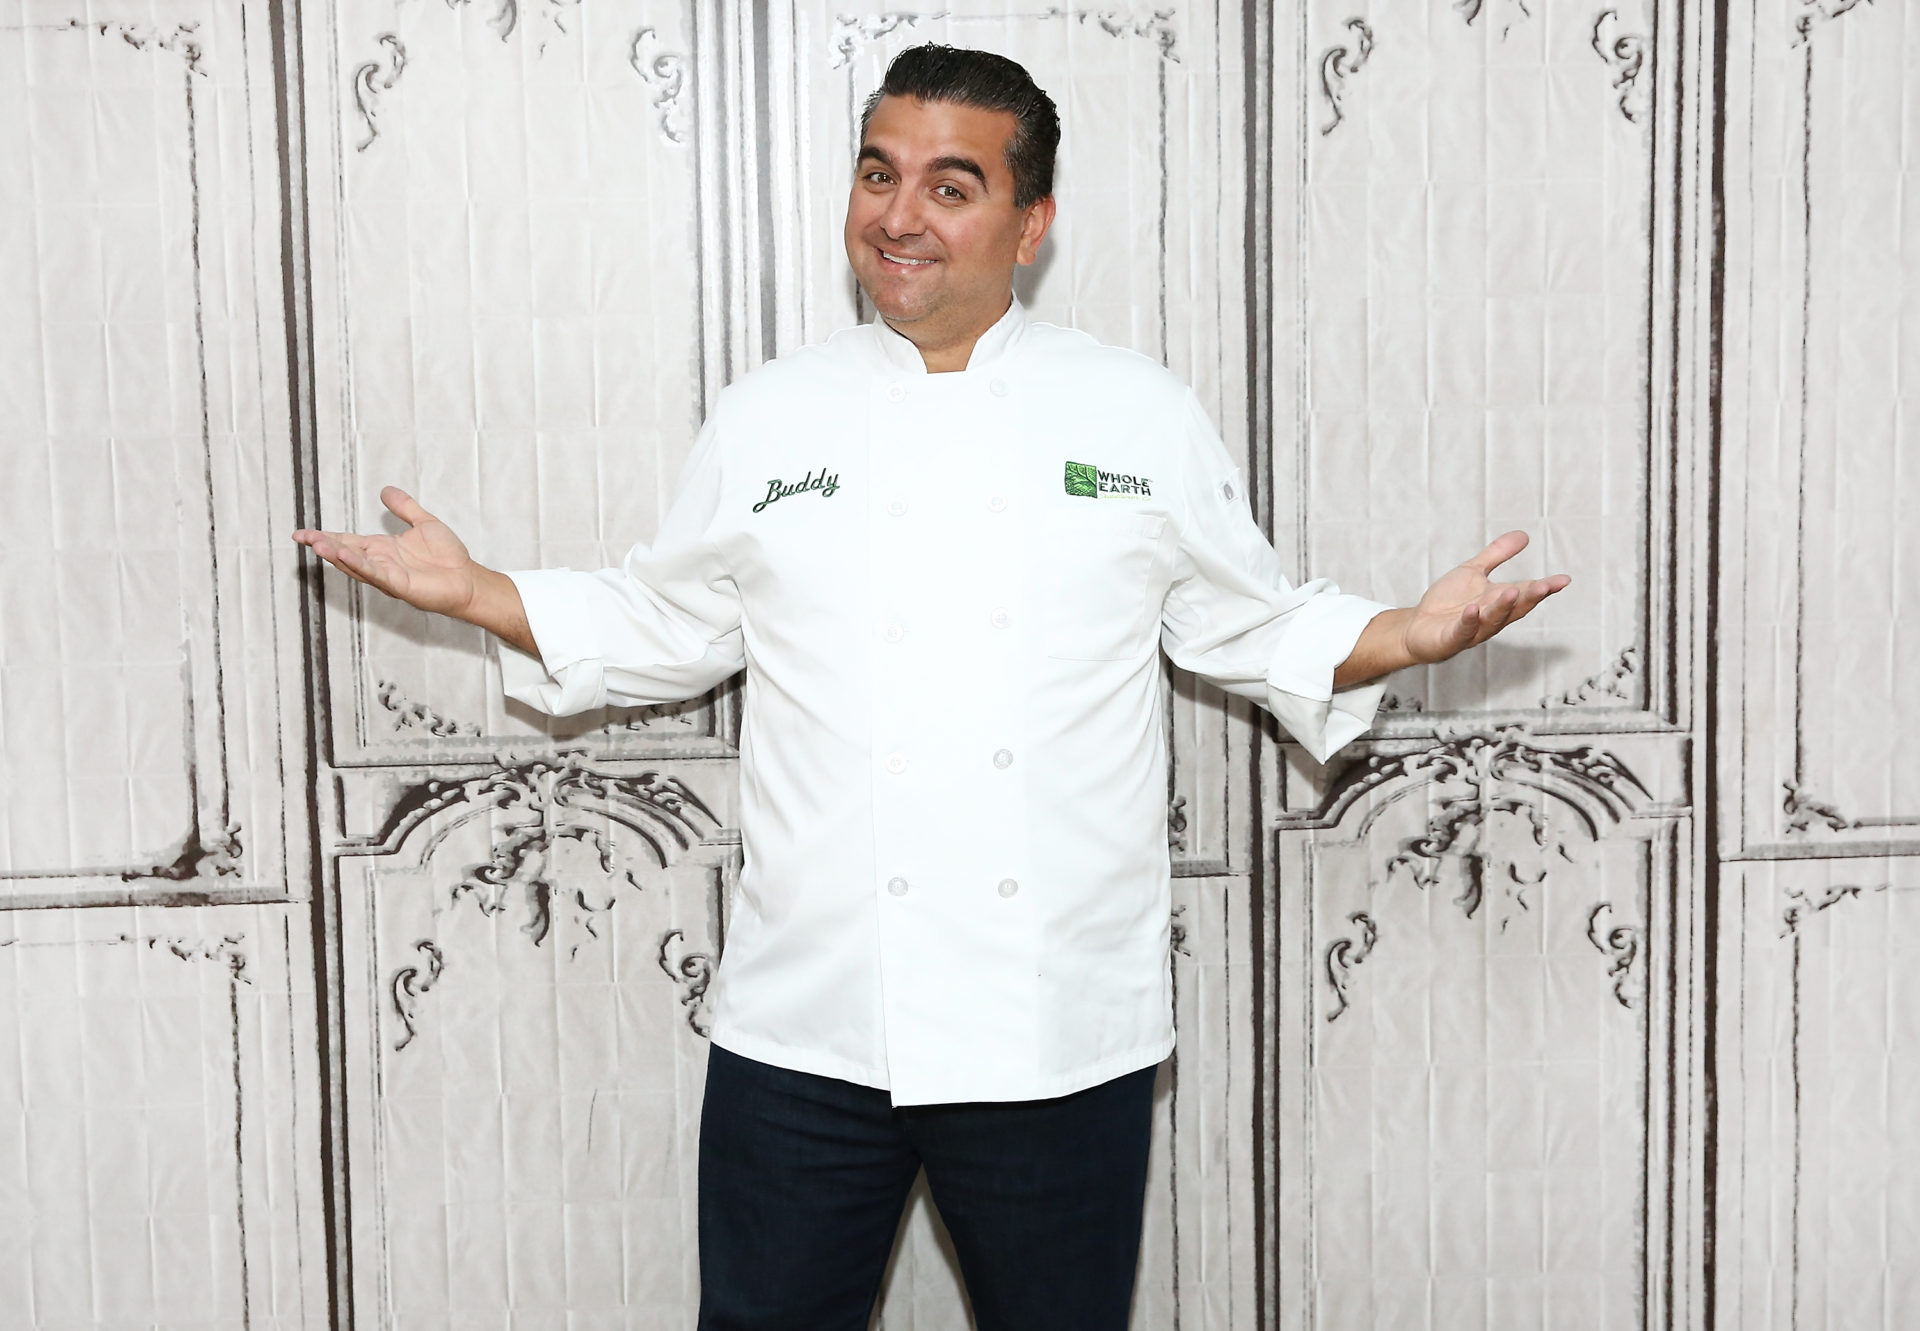 The Build Series features Buddy Valastro discussing his new 